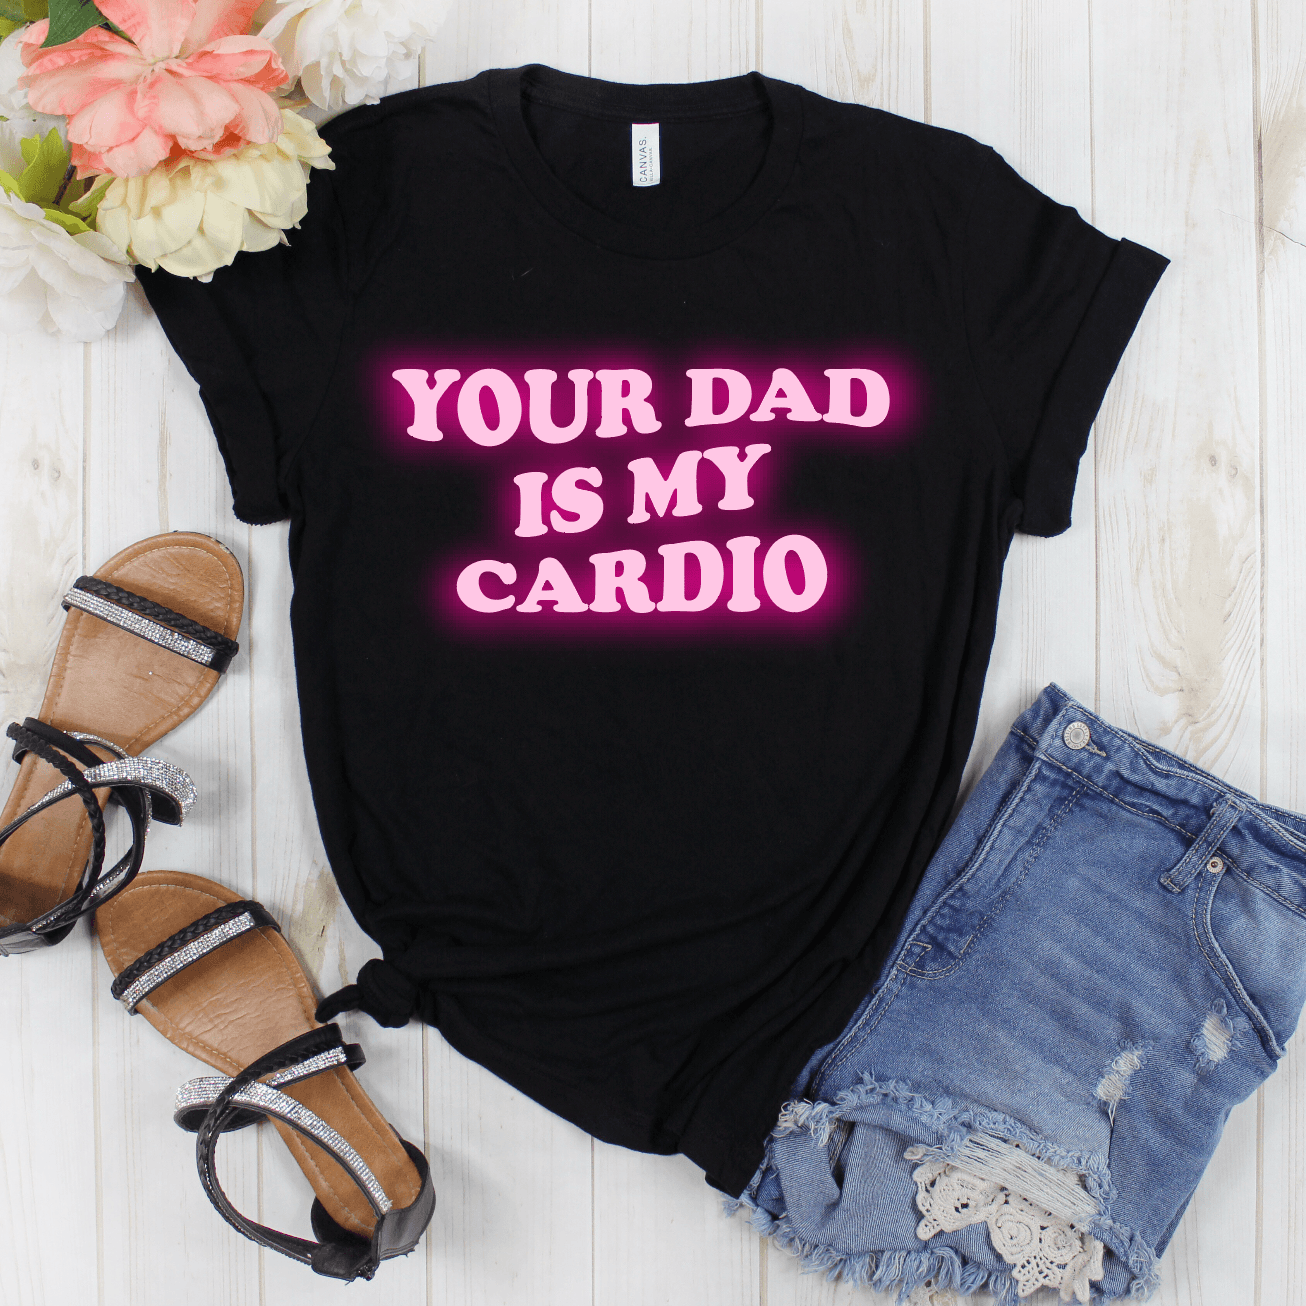 Copy of YOUR DAD IS MY CARDIO Full Length (PINK INK) - Signastyle Boutique